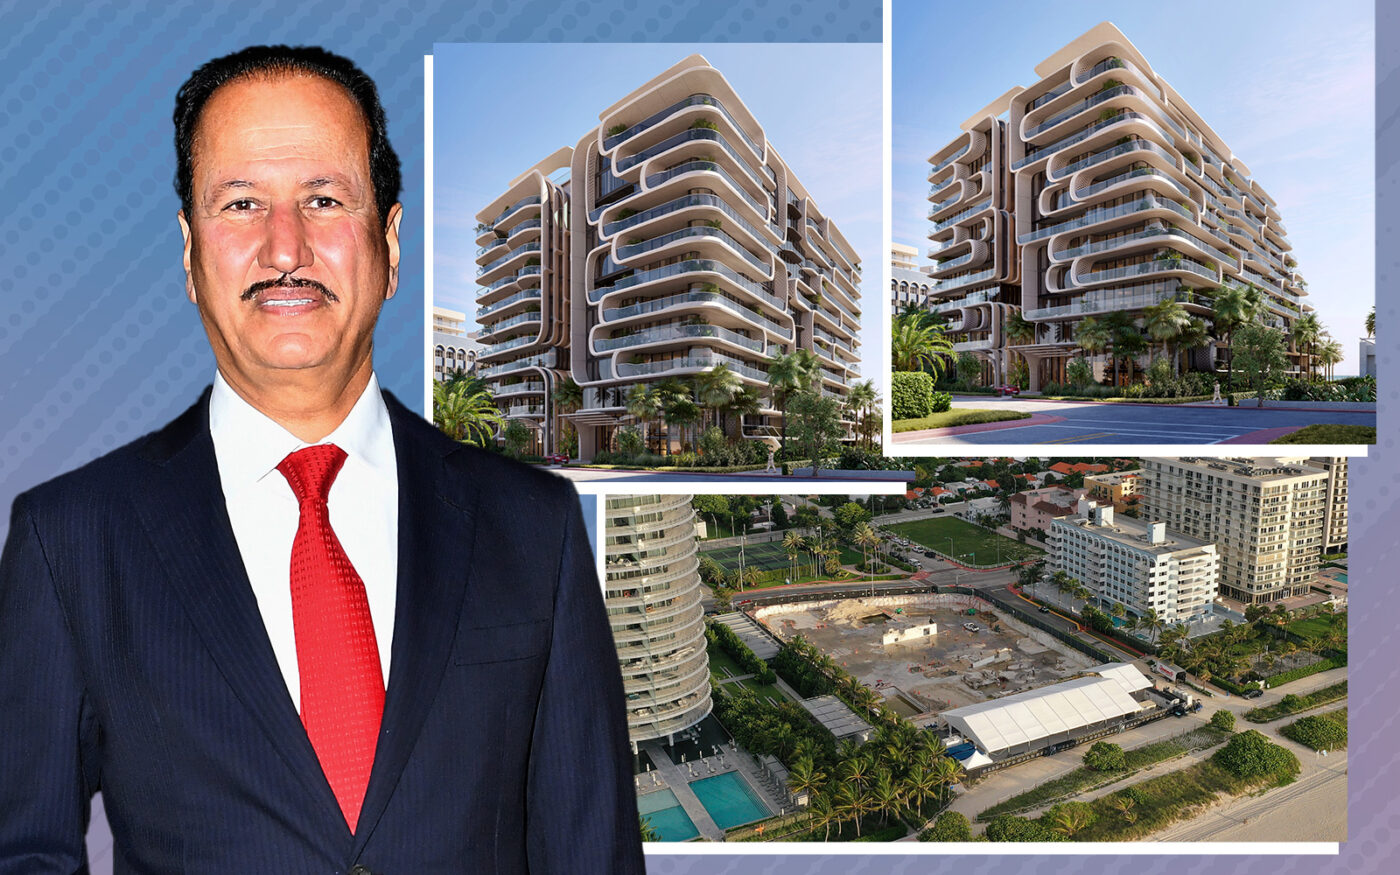 New plans for the Surfside condo collapse site by Hussain Sajwani of Damac Properties